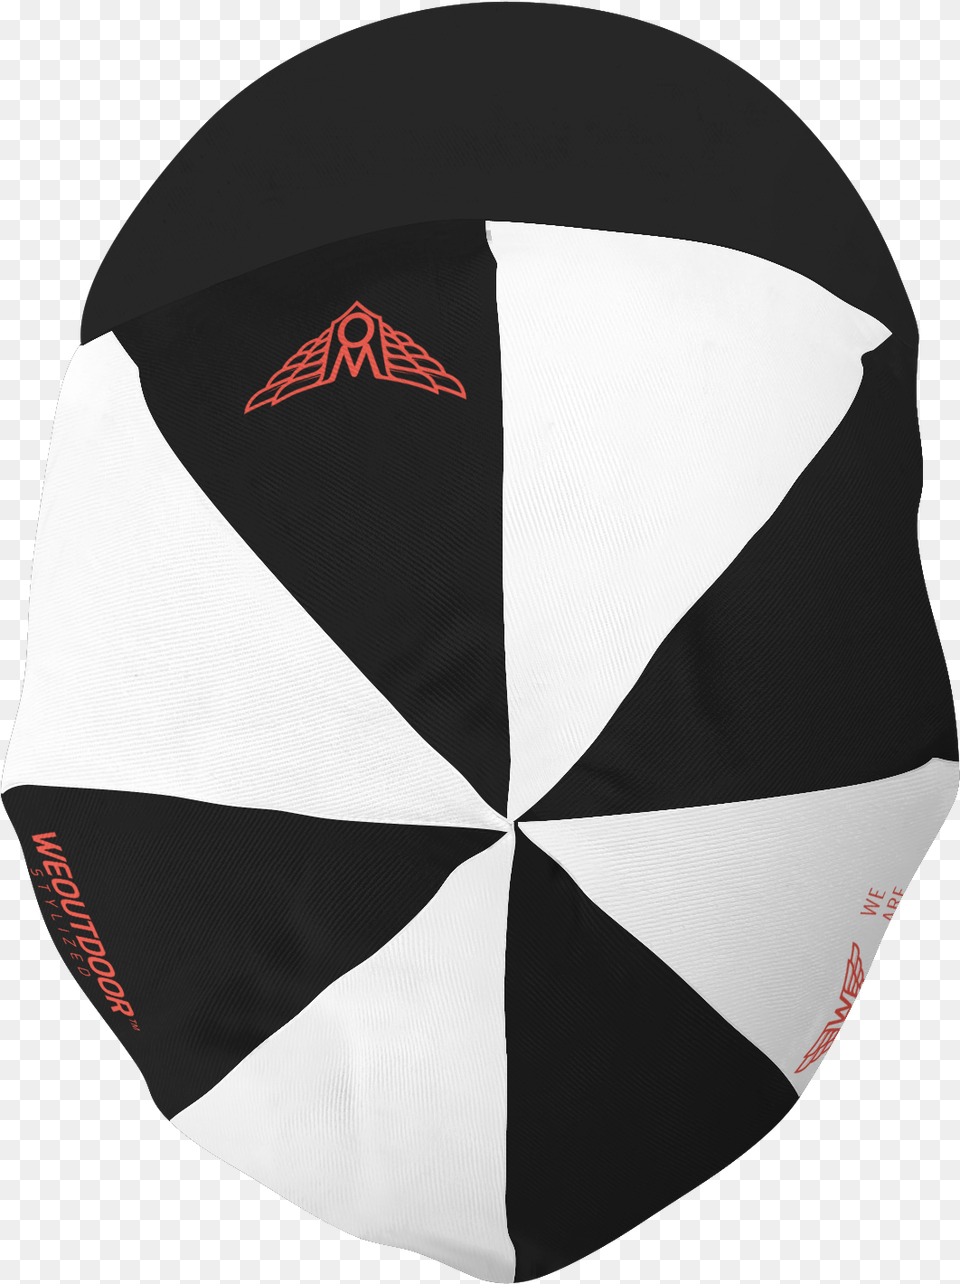 Greys Cap Summer Offer Umbrella, Clothing, Hat, Swimwear, Canopy Free Png Download